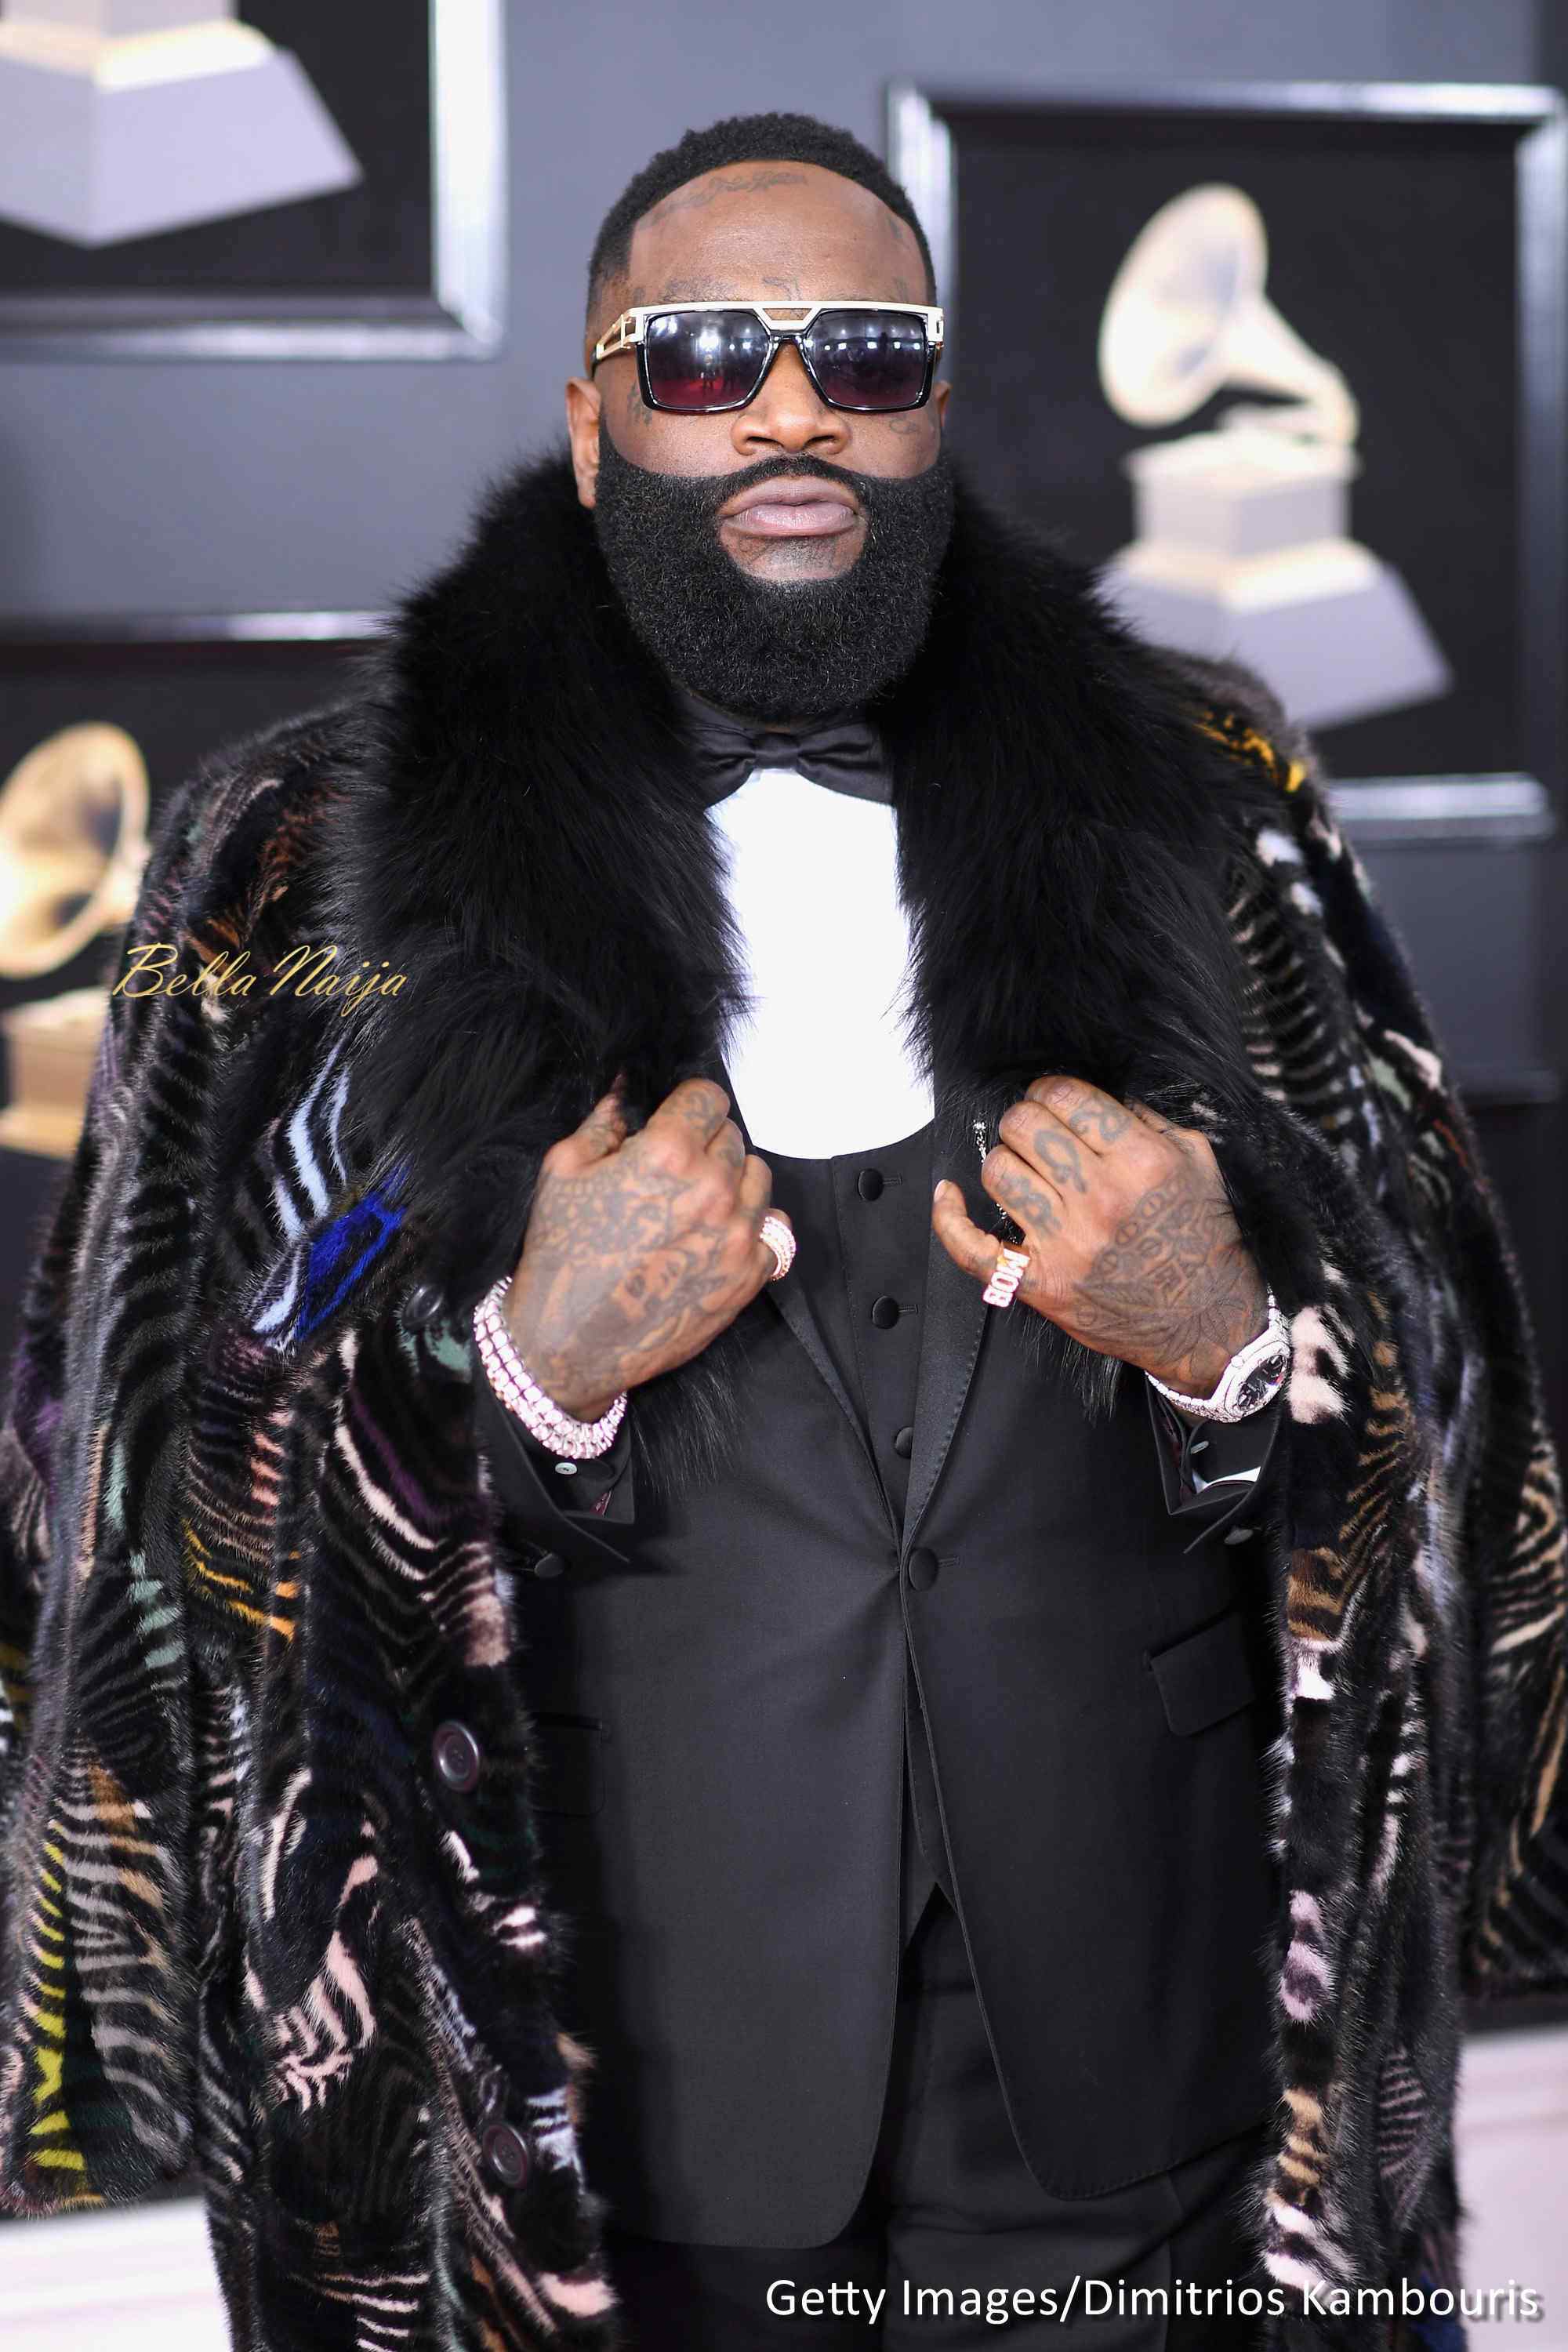 Rick Ross reportedly placed on Life Support following Cardiac Arrest